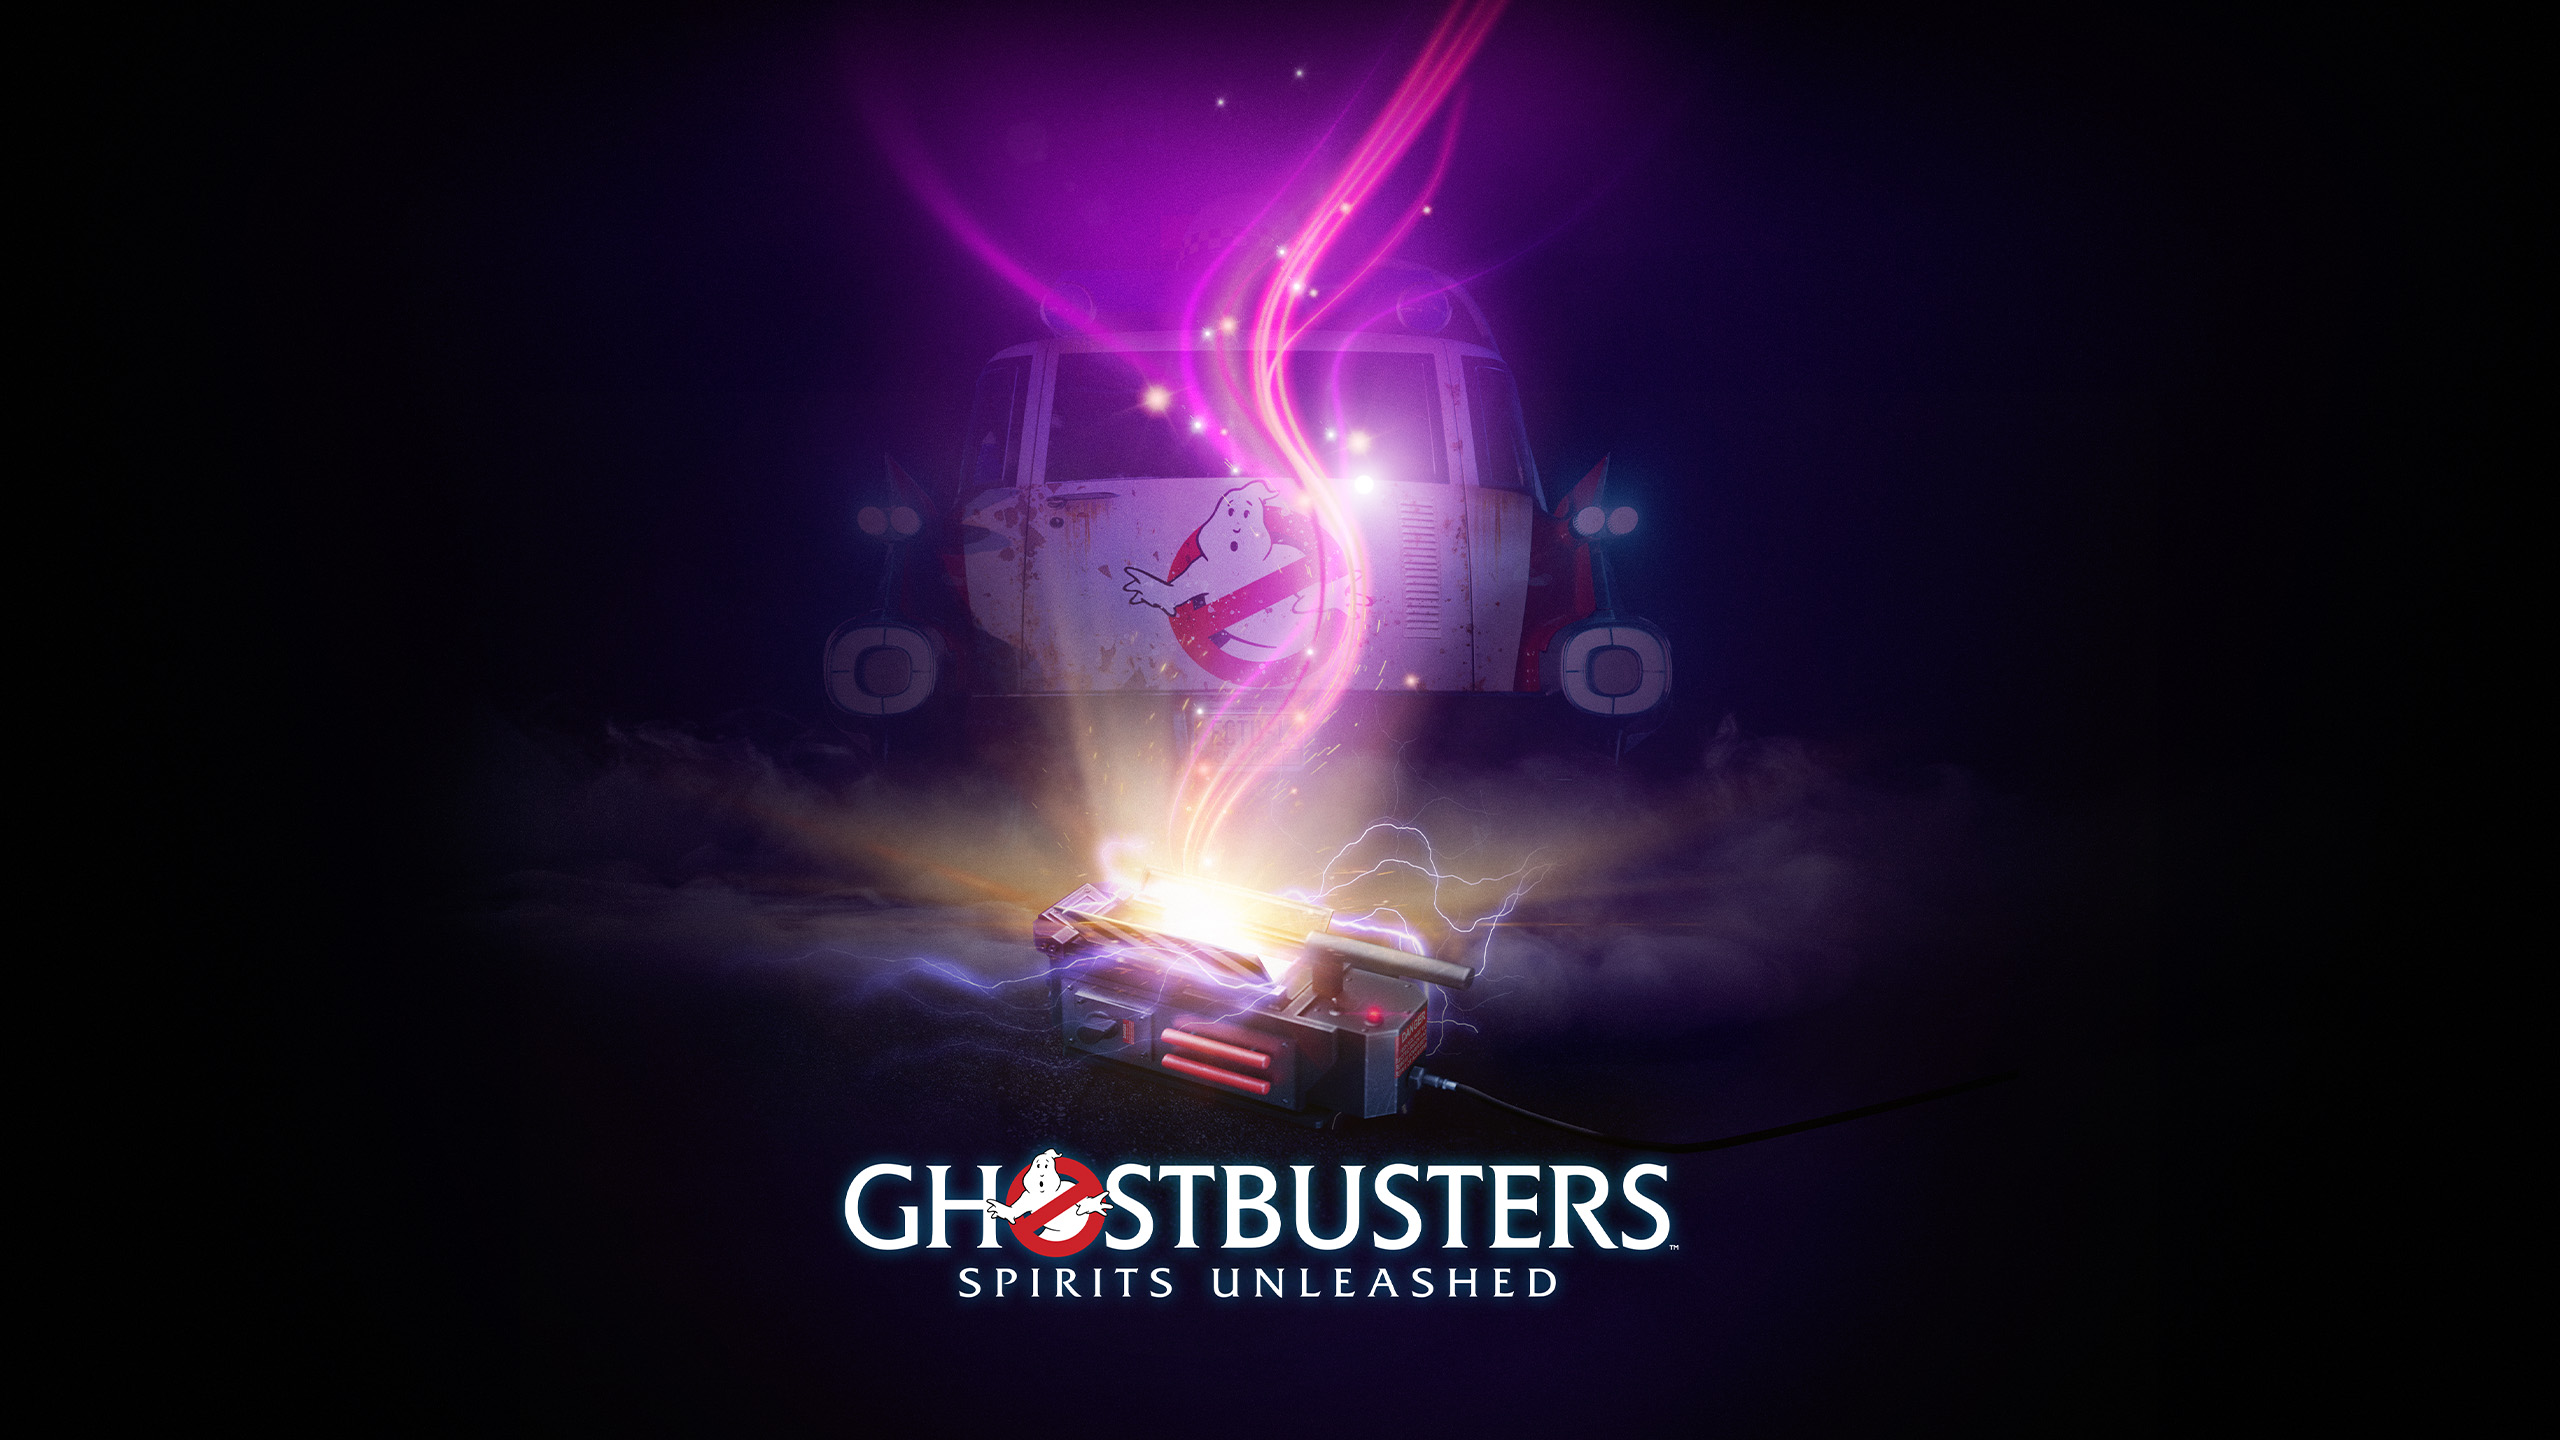 Ghostbusters: Spirits